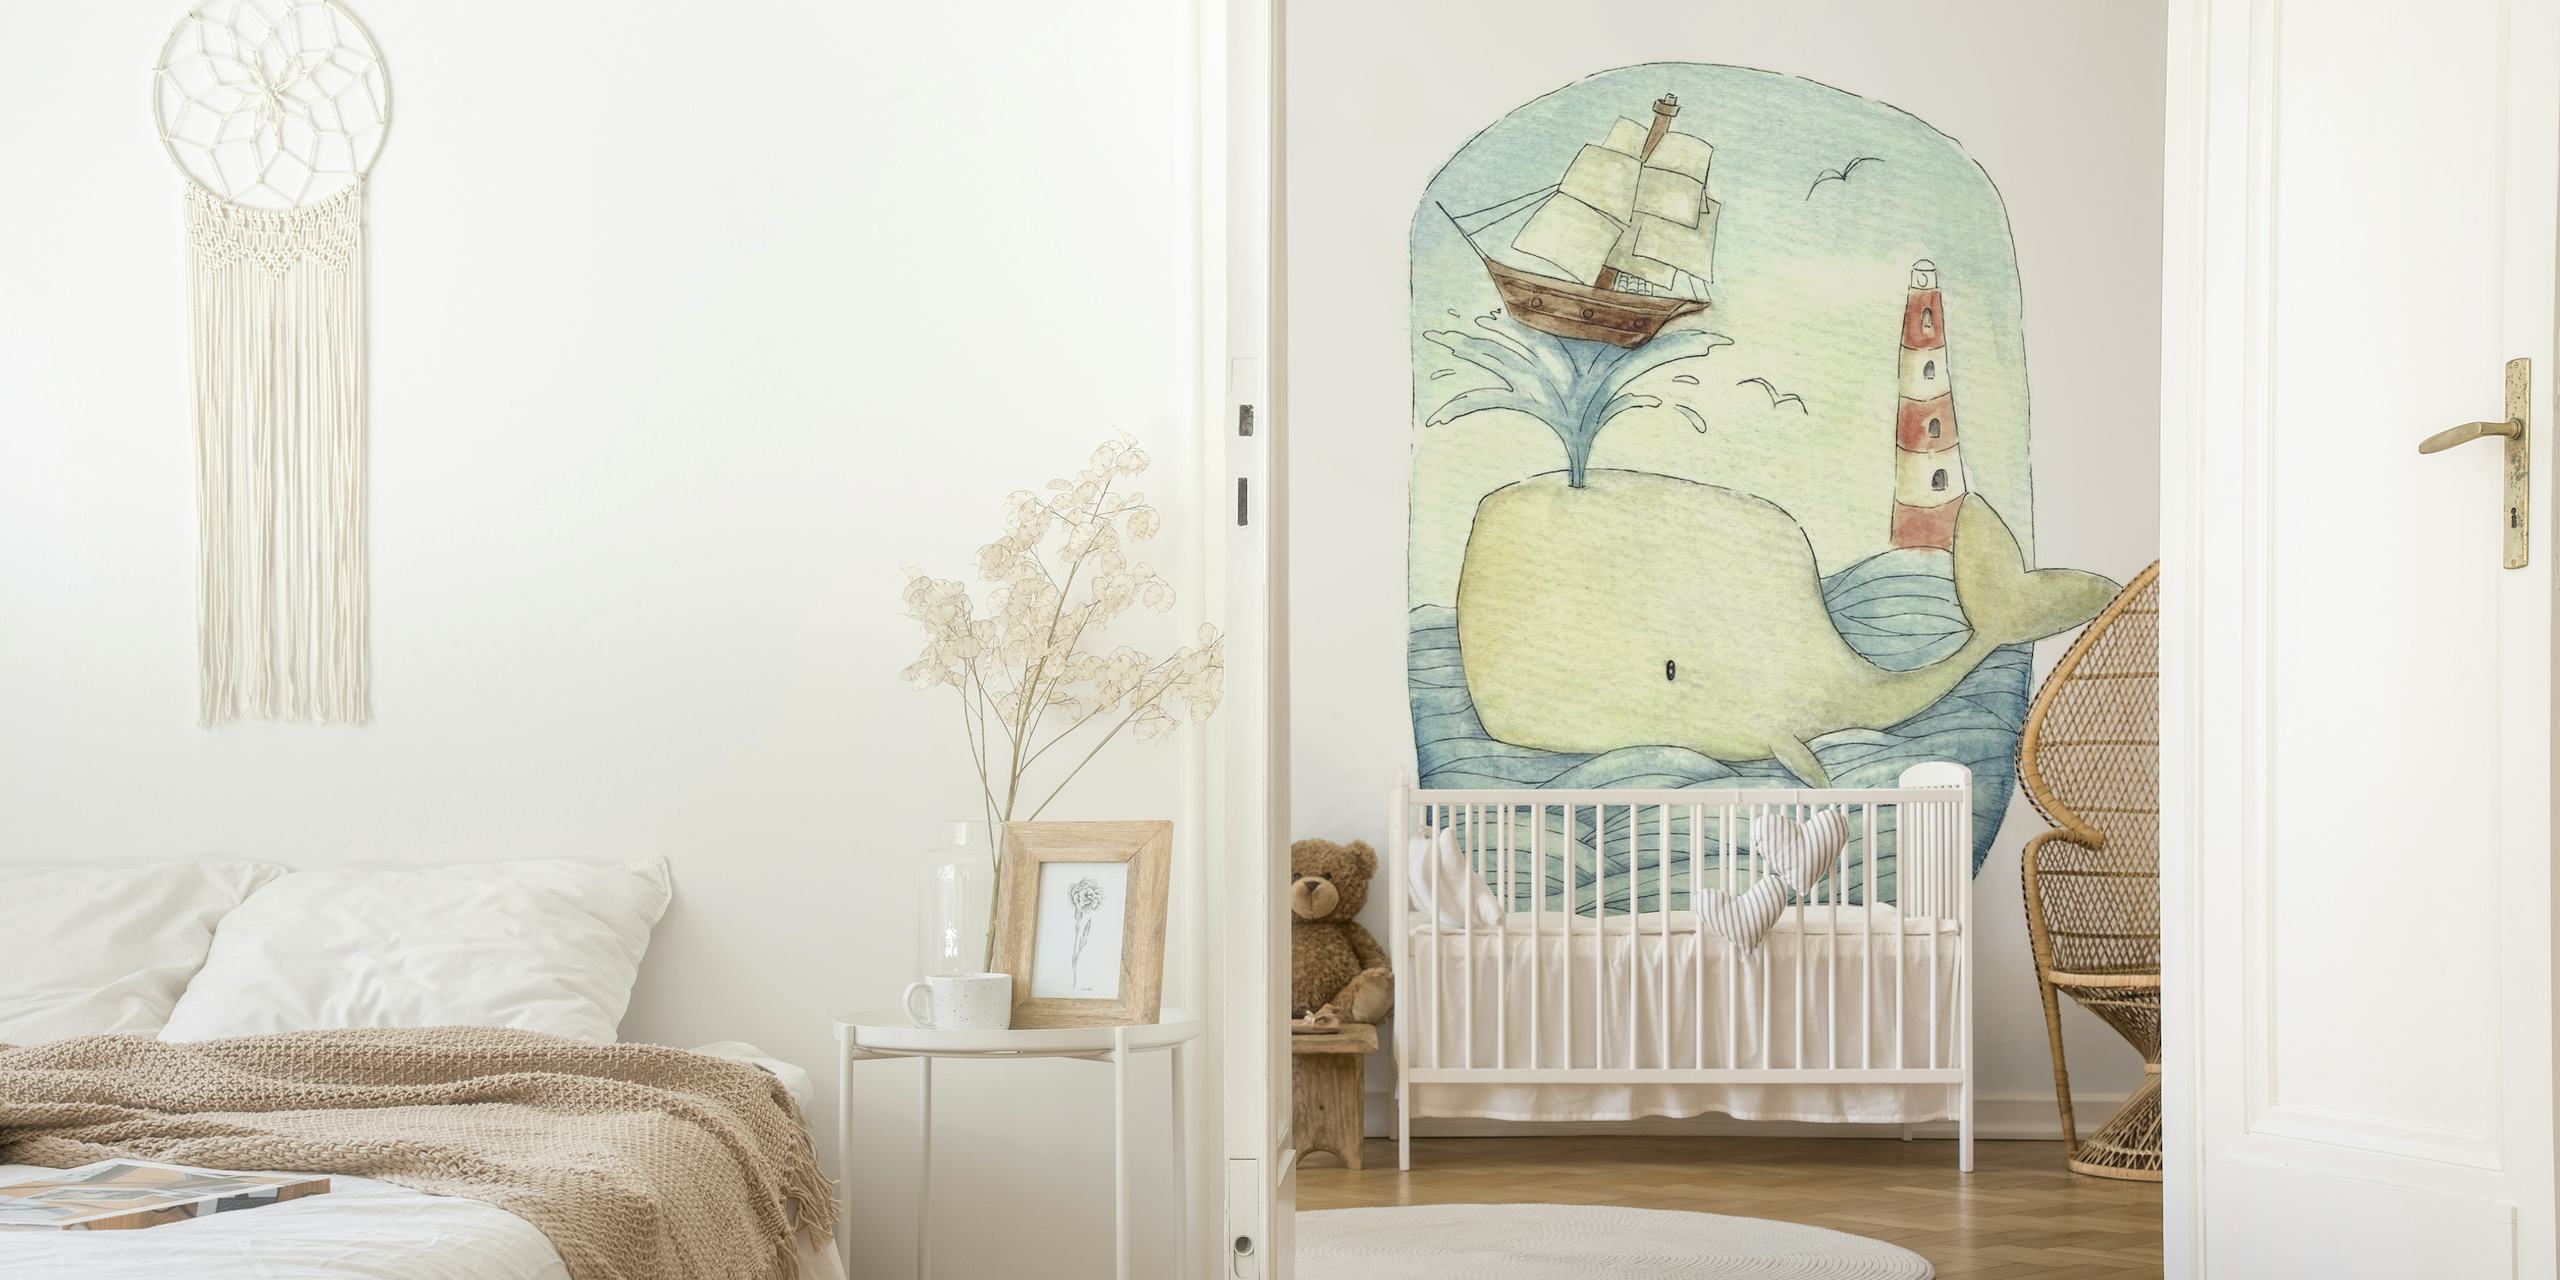 Illustrative wall mural featuring a cute whale with a sailboat and lighthouse in a watercolor style